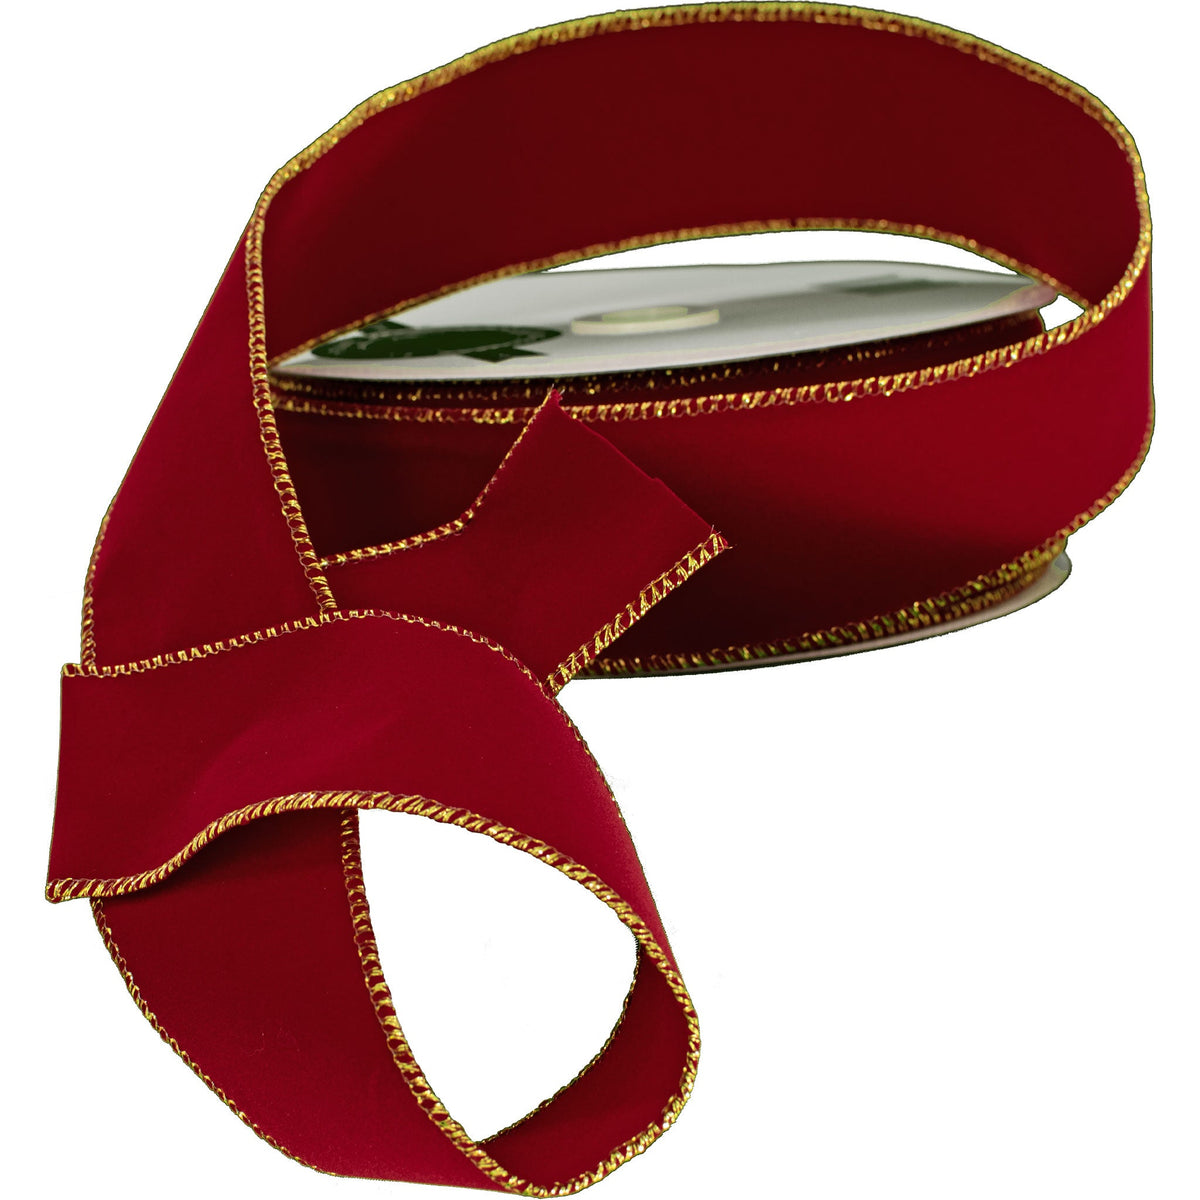 The Gold Wire edge makes the ribbon super easy to use to make bows and wrap presents with.